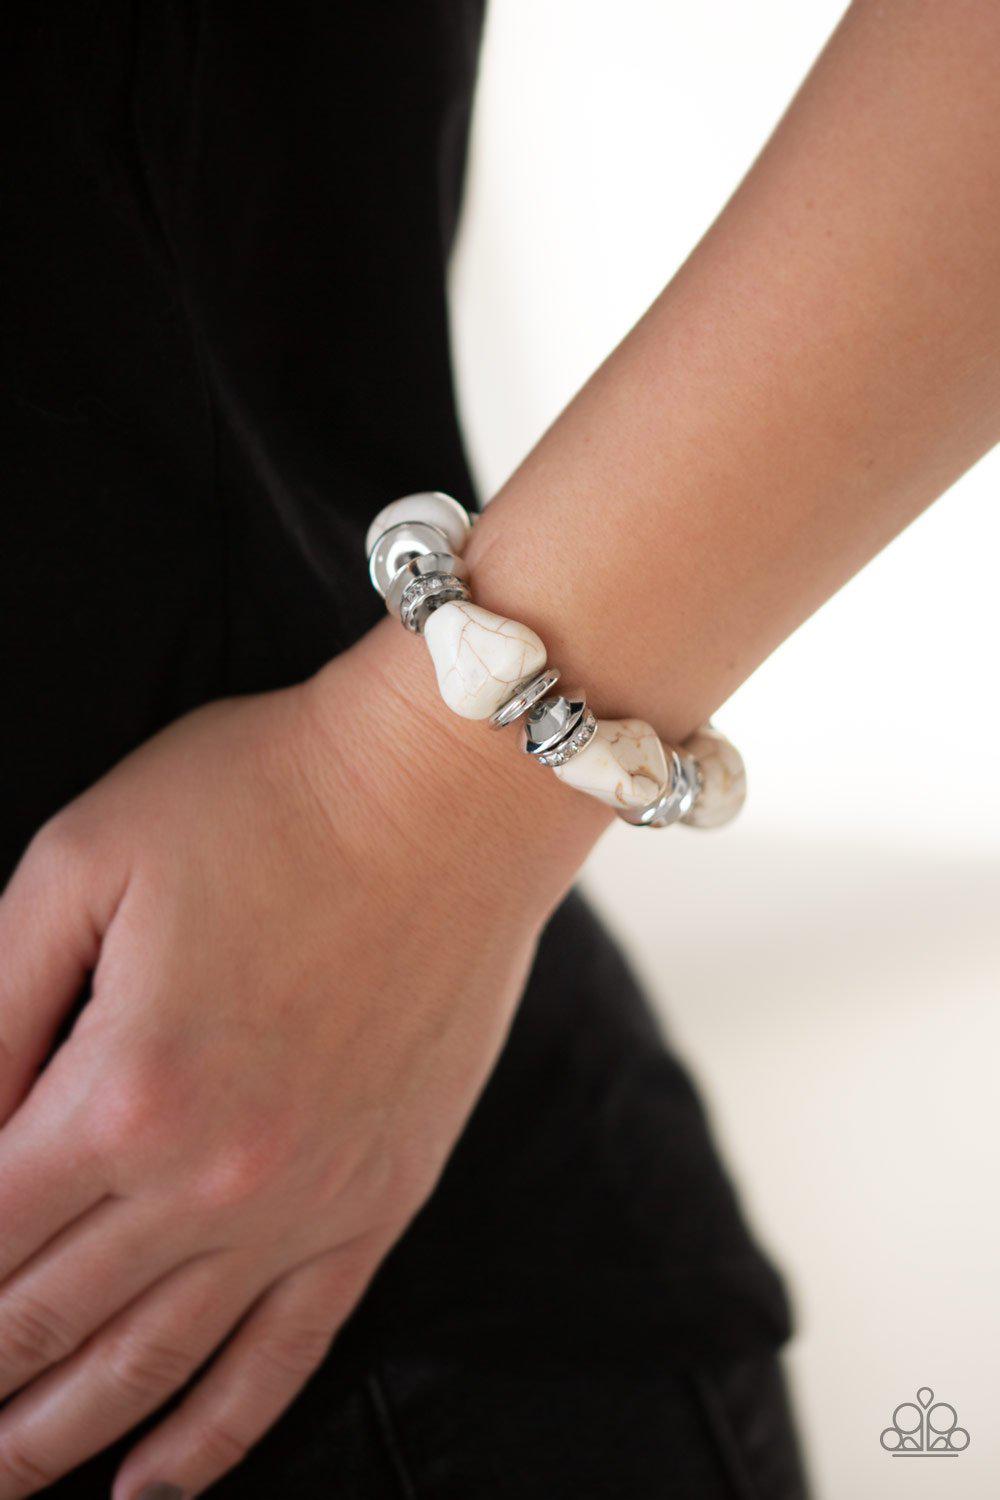 Stone Age Stunner Silver and White Stone Bracelet - Paparazzi Accessories-CarasShop.com - $5 Jewelry by Cara Jewels